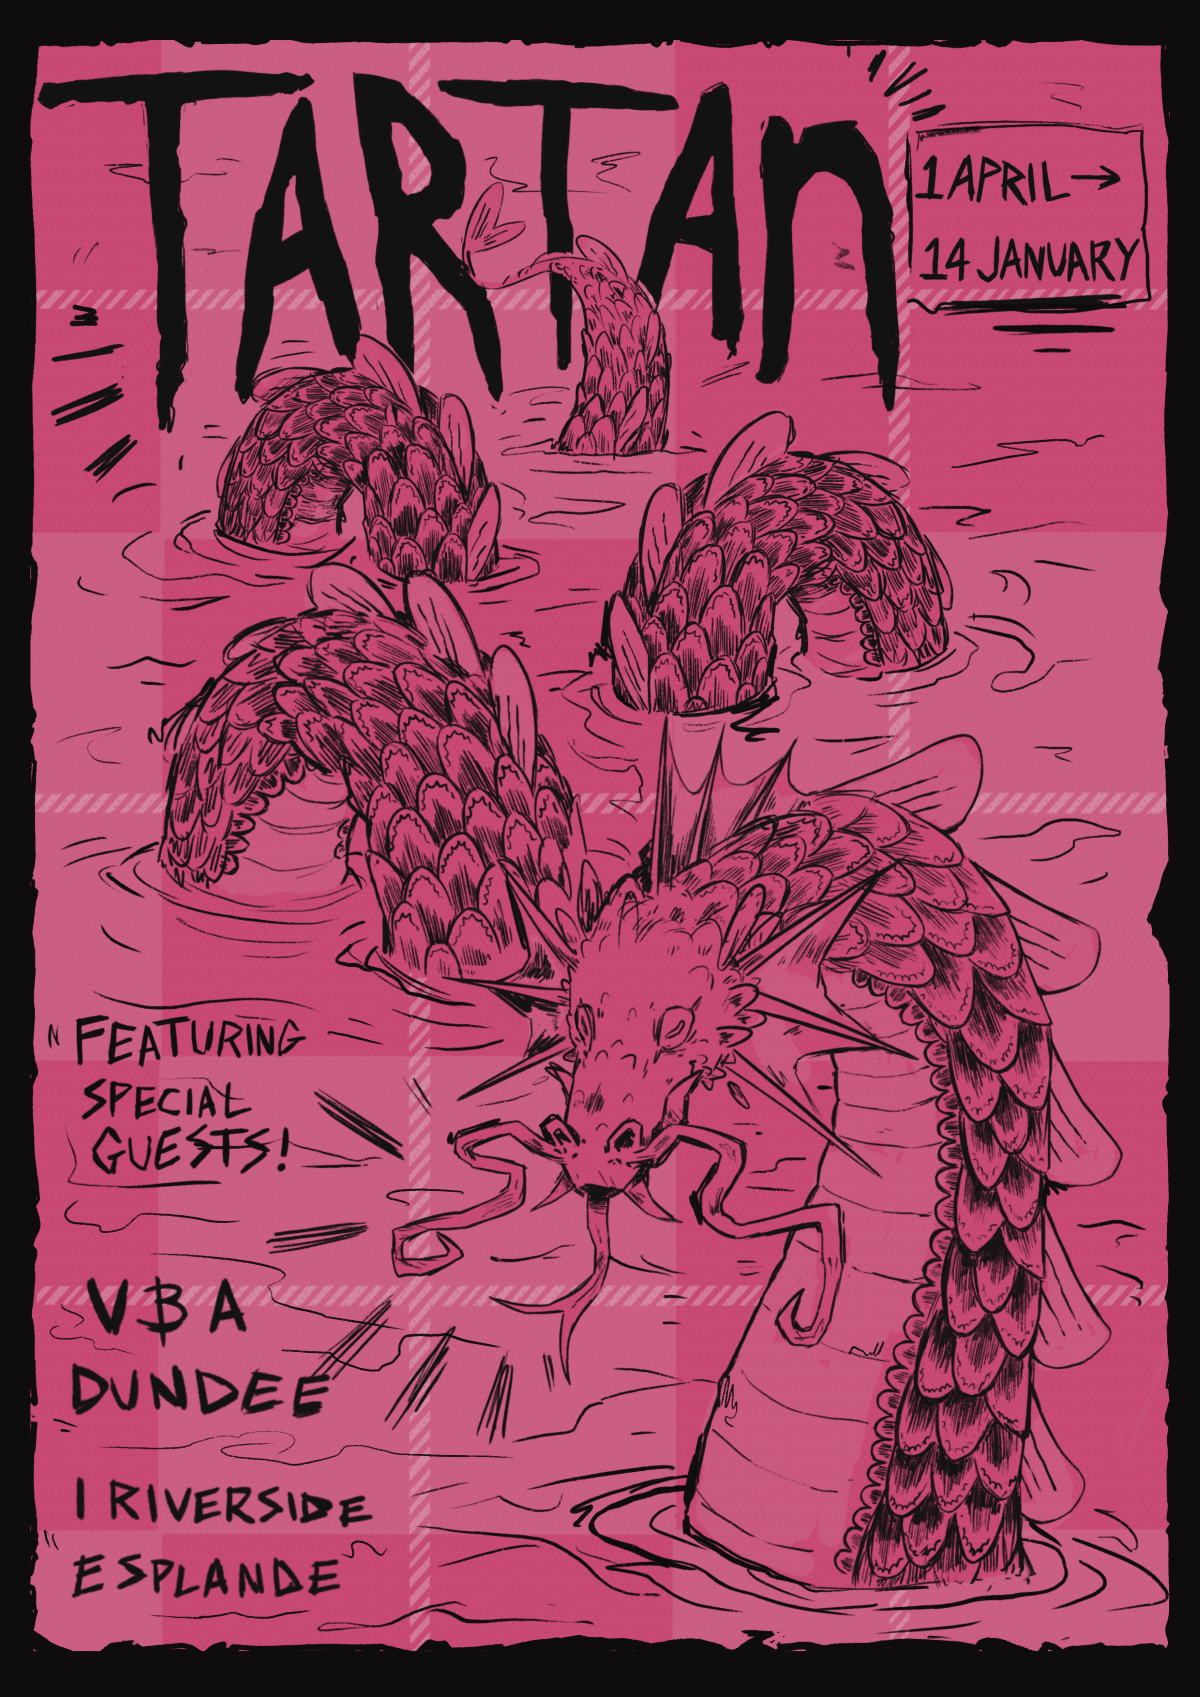 A black line drawing of the Loch Ness monster on a pink, tartan inspired background. There is black text which reads "Tartan. 1 April until 14 January. Featuring special guests! V&A Dundee. 1 River Esplanade"